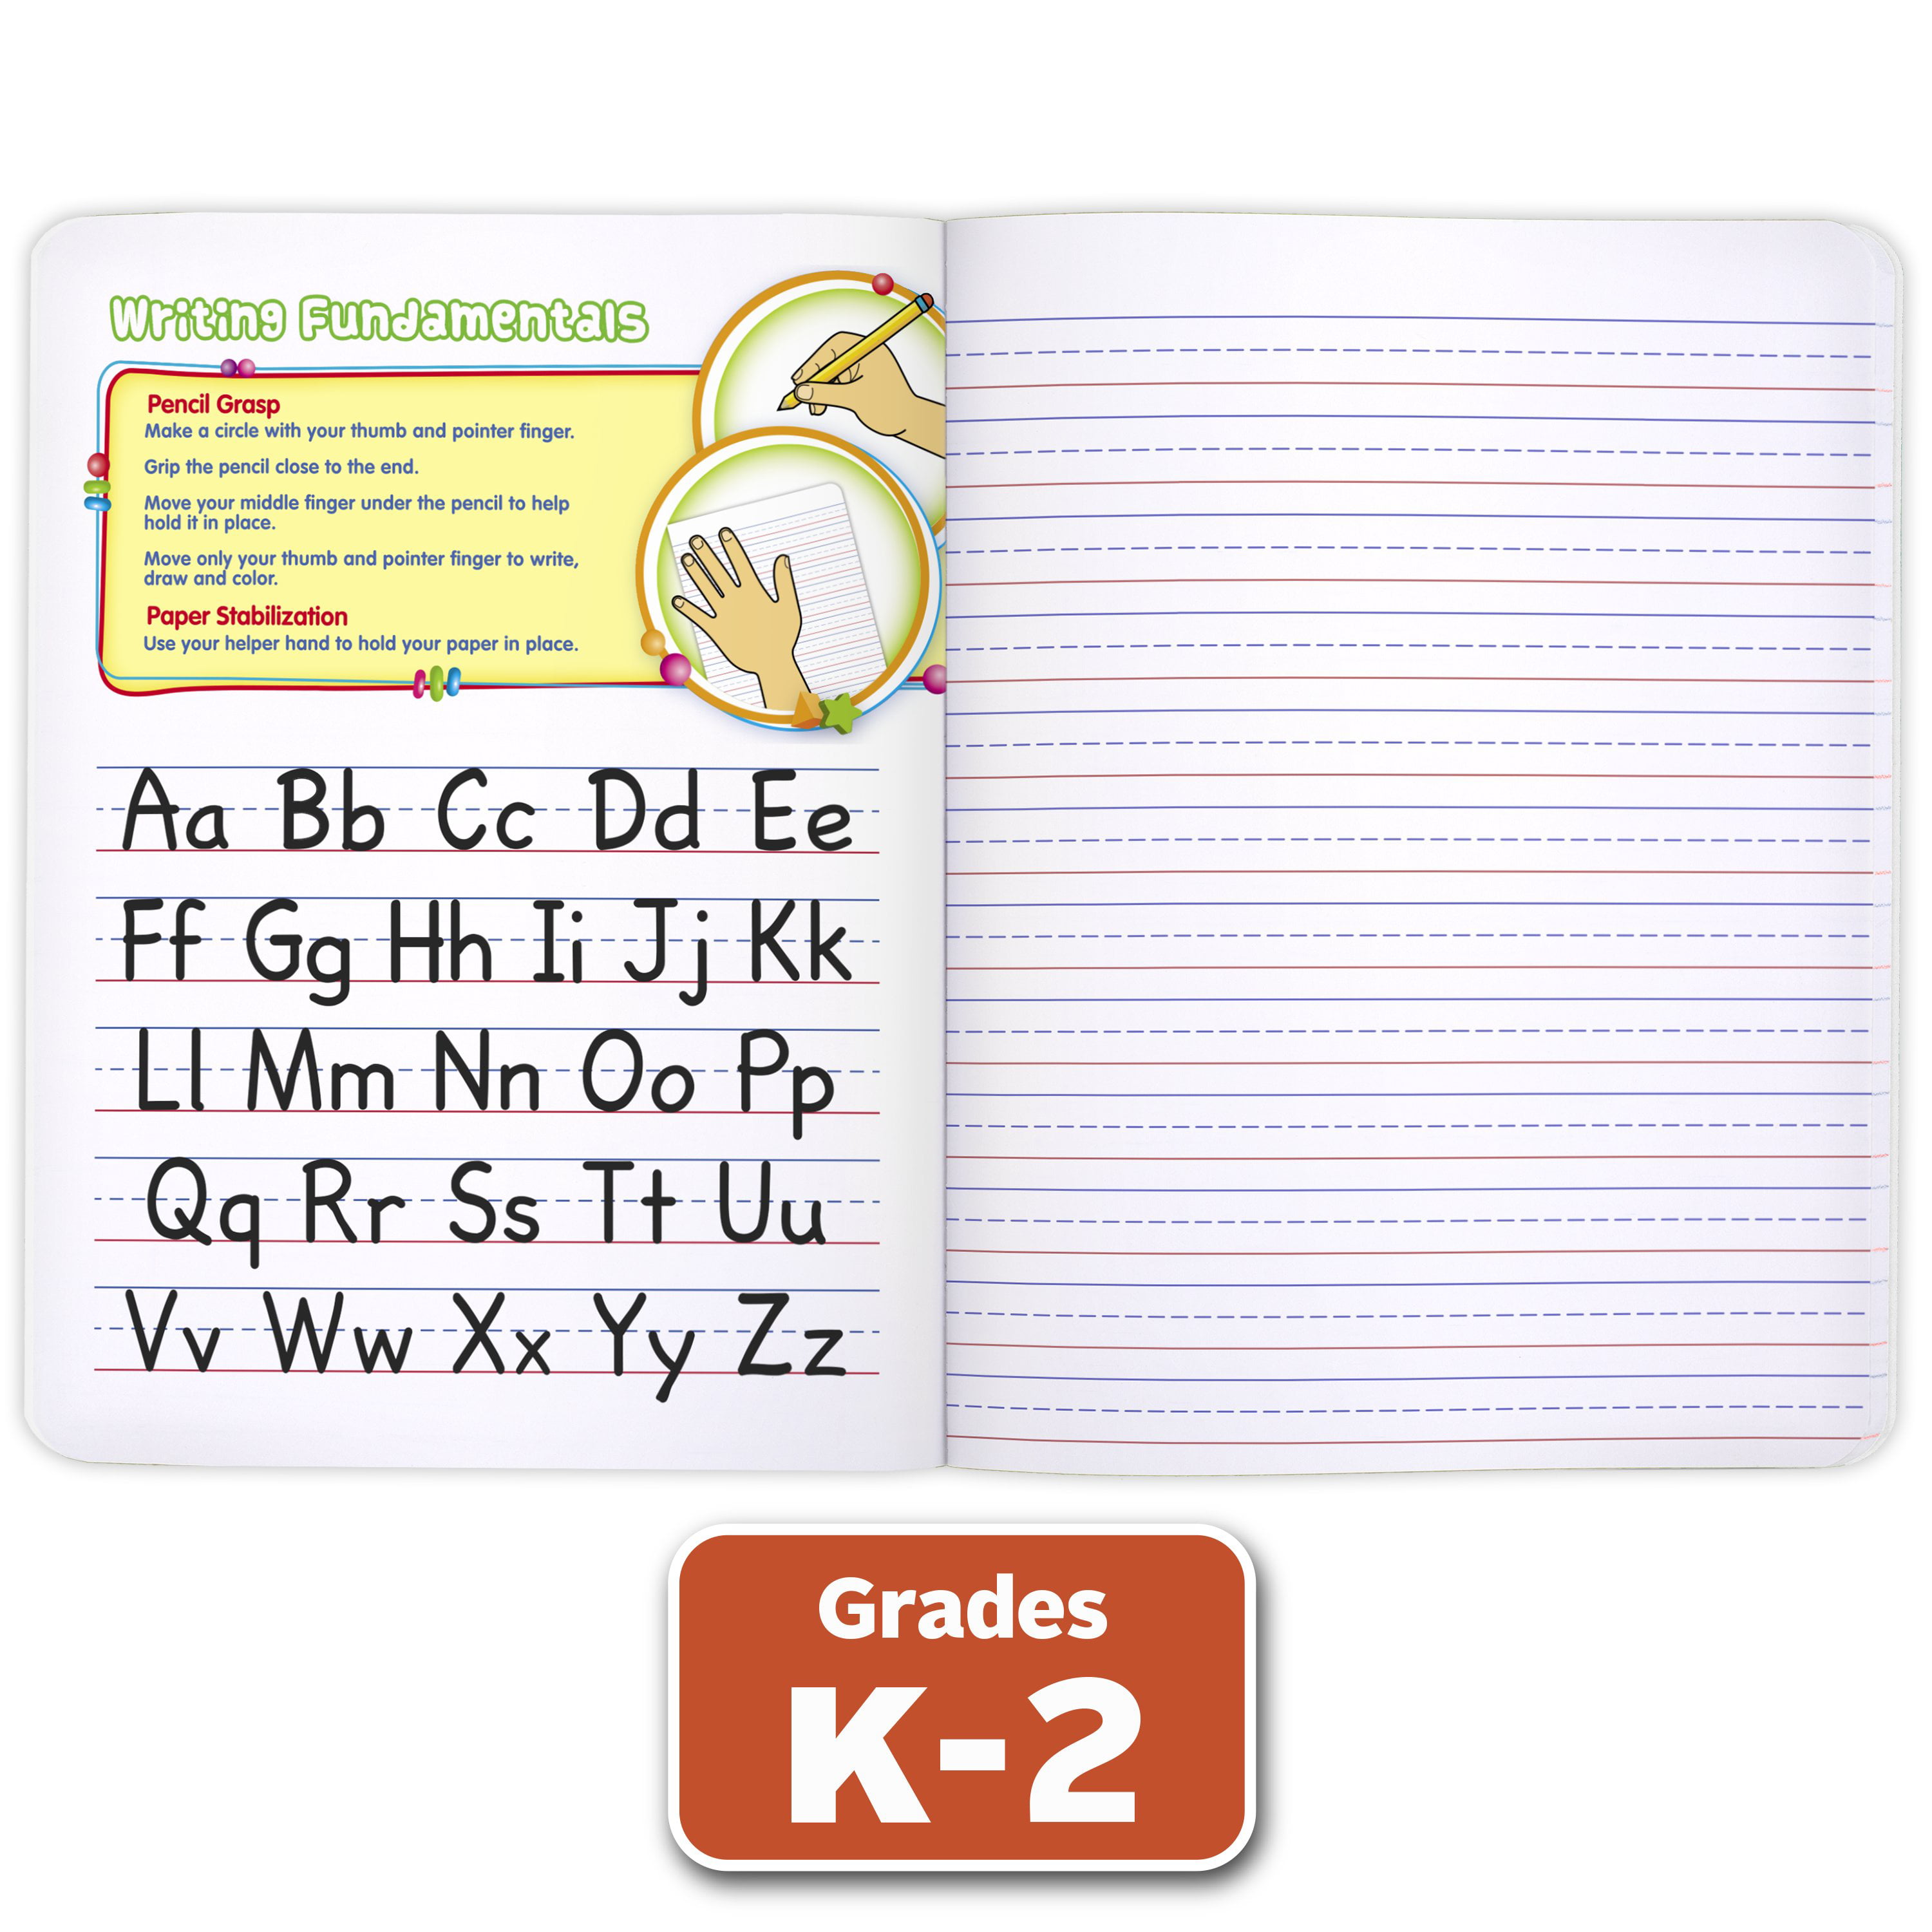 Mead Primary Journal, Grades K-2, 9-3/4x7-1/2, WE Paper (MEA09902) -  Envision Supply Source